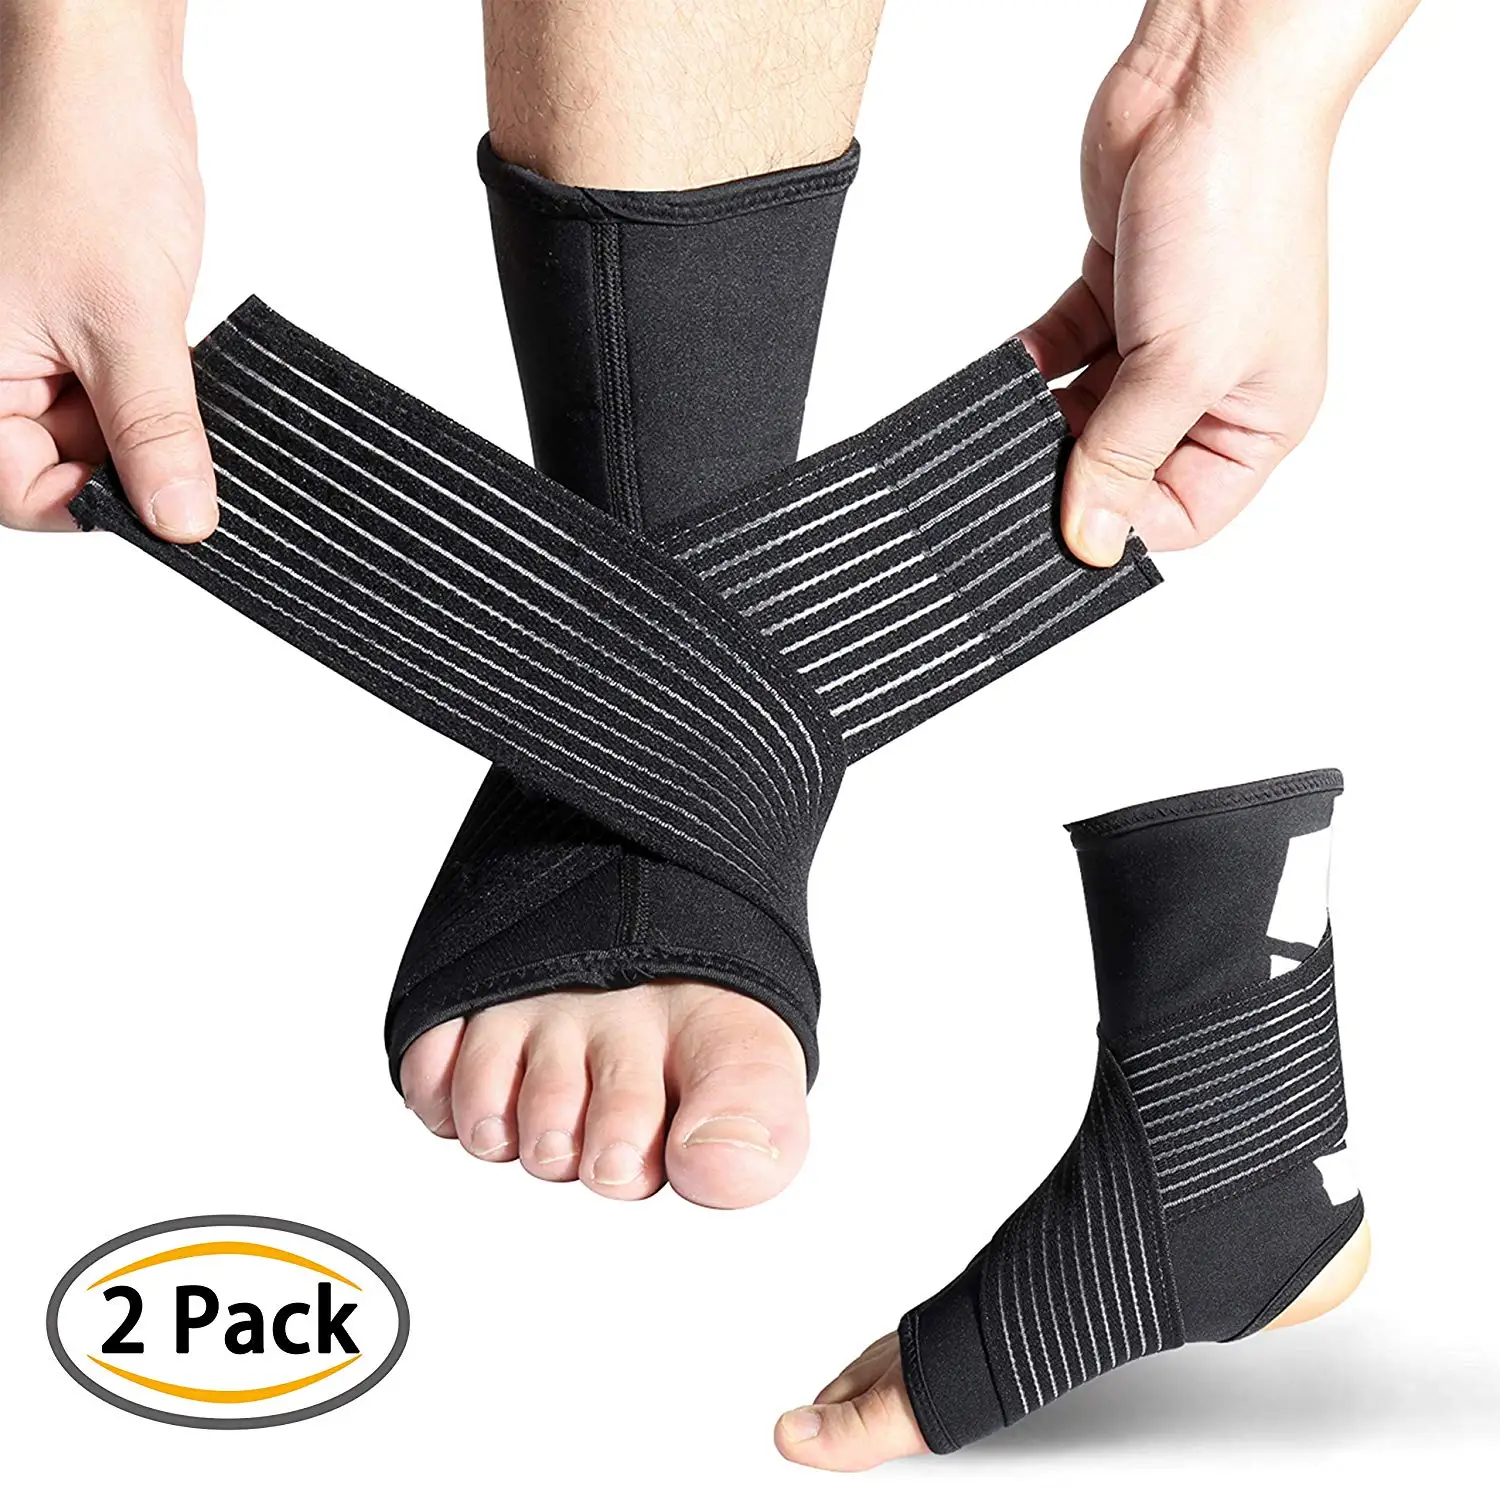 Buy Ankle Brace,Ankle Support Breathable Ankle Brace for Running ...